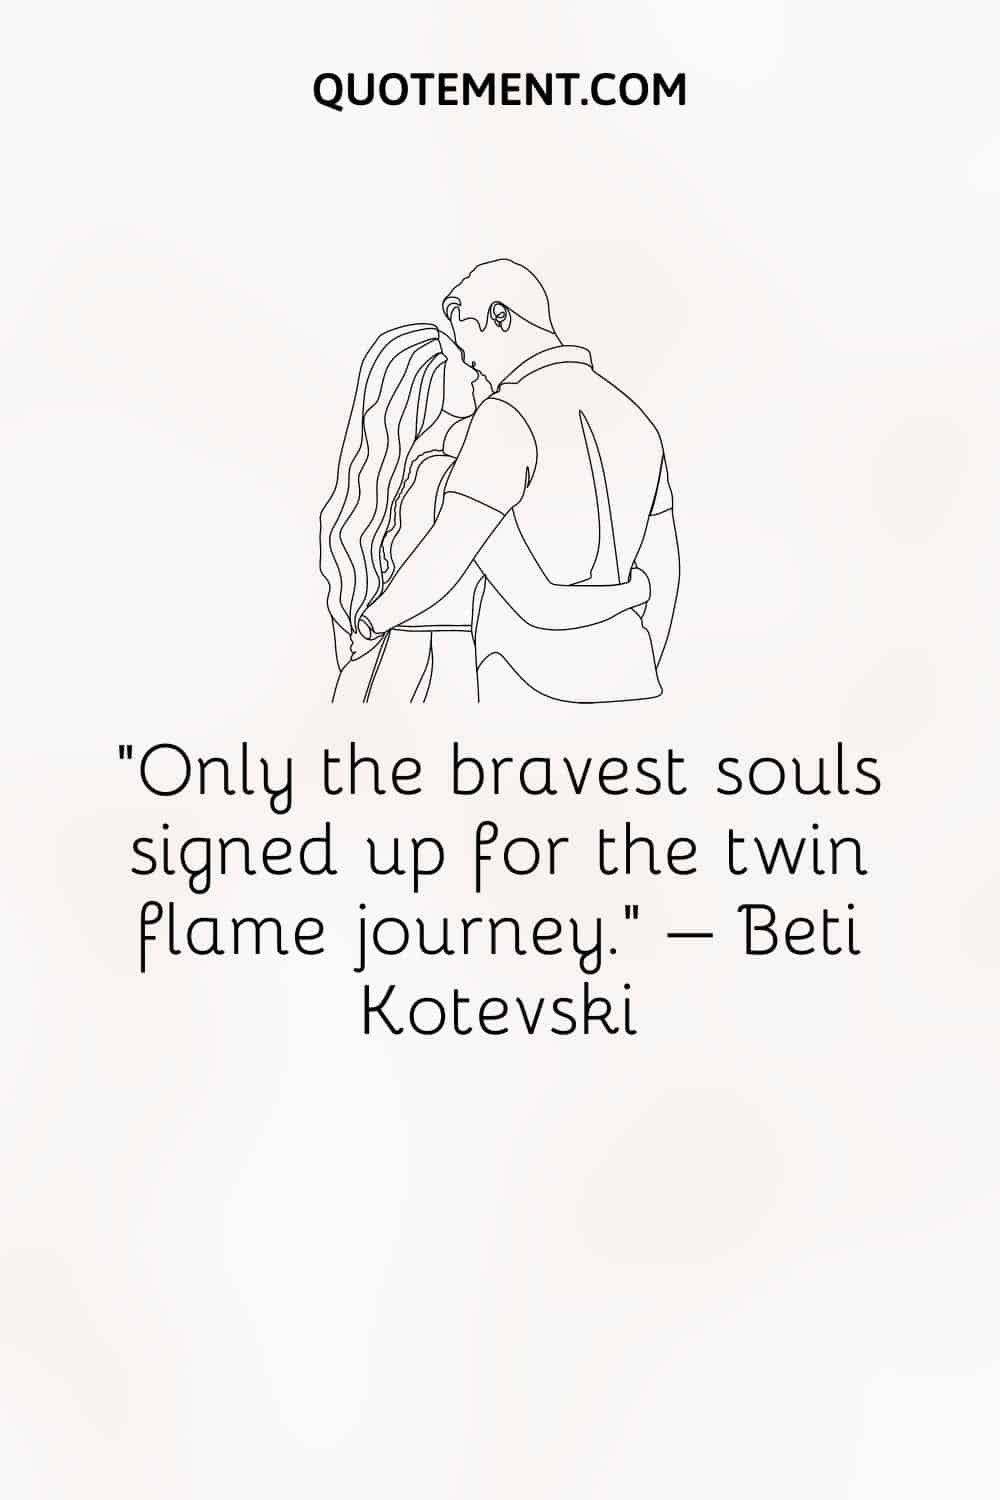 Only the bravest souls signed up for the twin flame journey